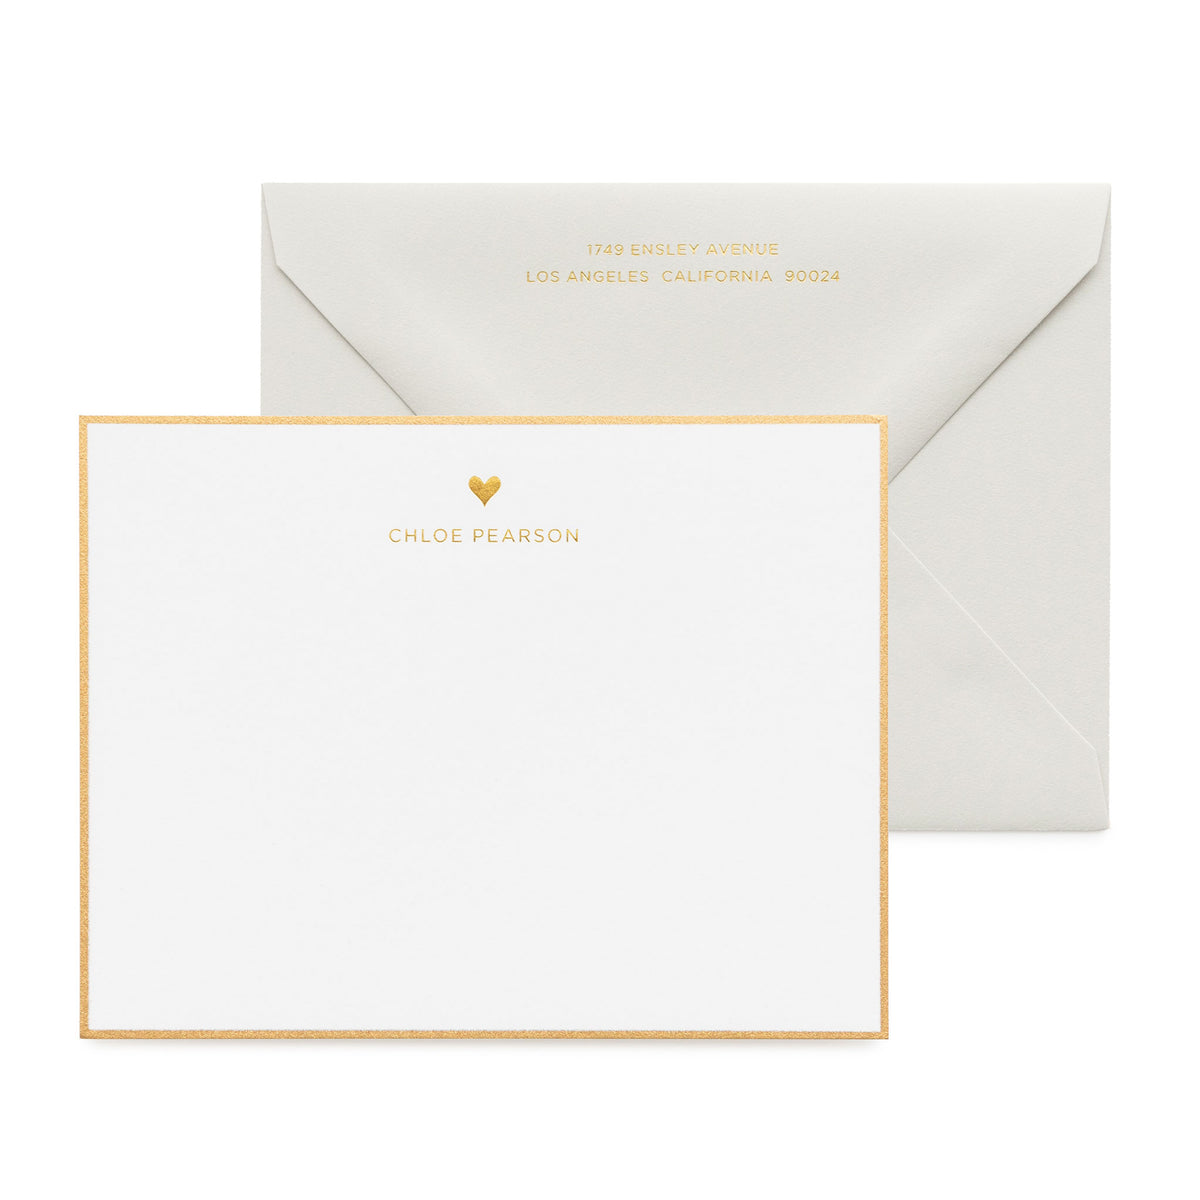 Gold heart custom stationery with grey envelope